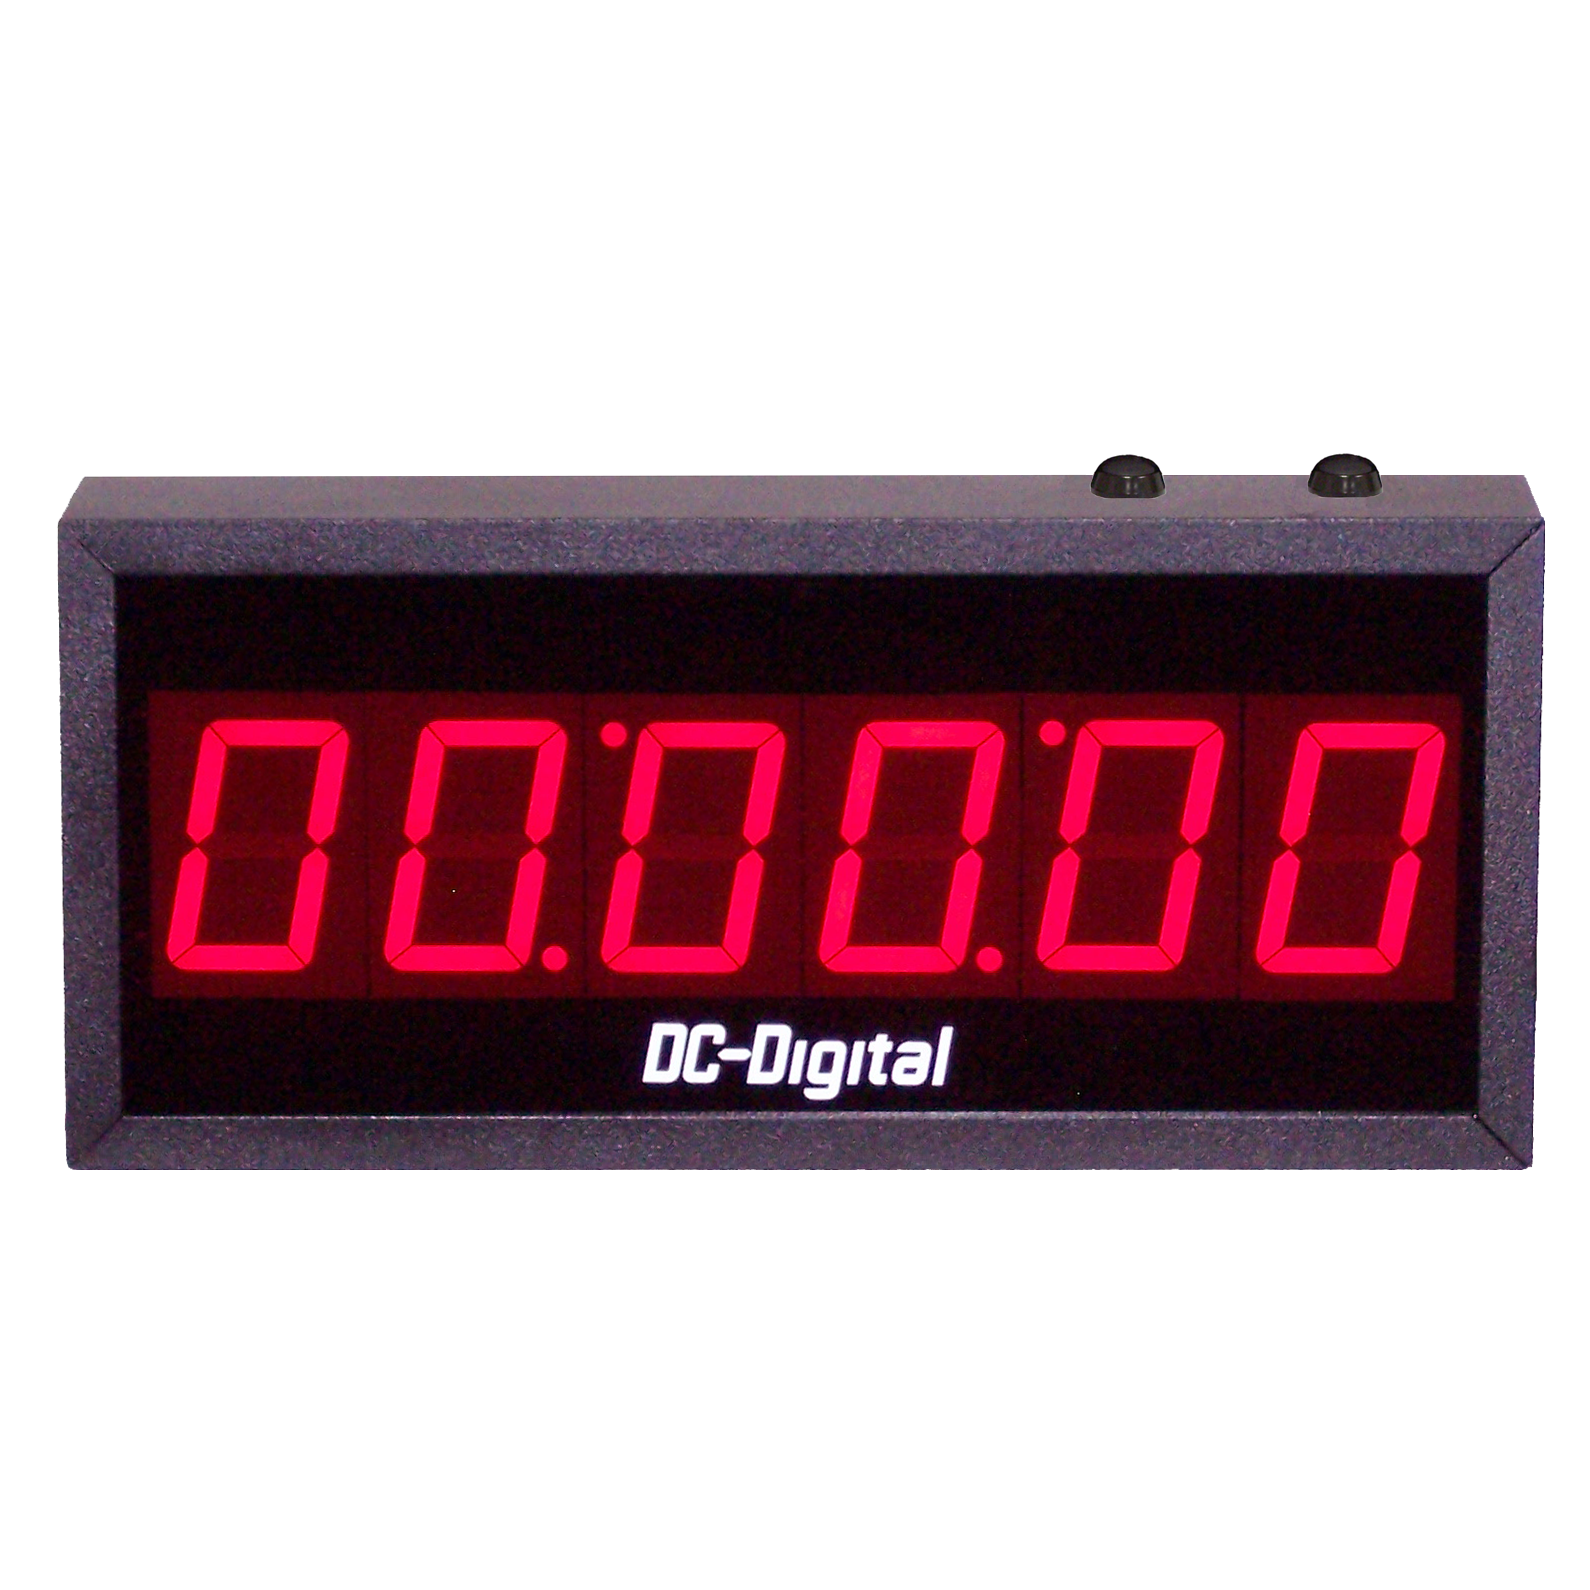 (DC-256T-UP) Push-Button Controlled, Digital Count Up Timer-Clock, 2.3 Inch Digits ...1590 x 1590